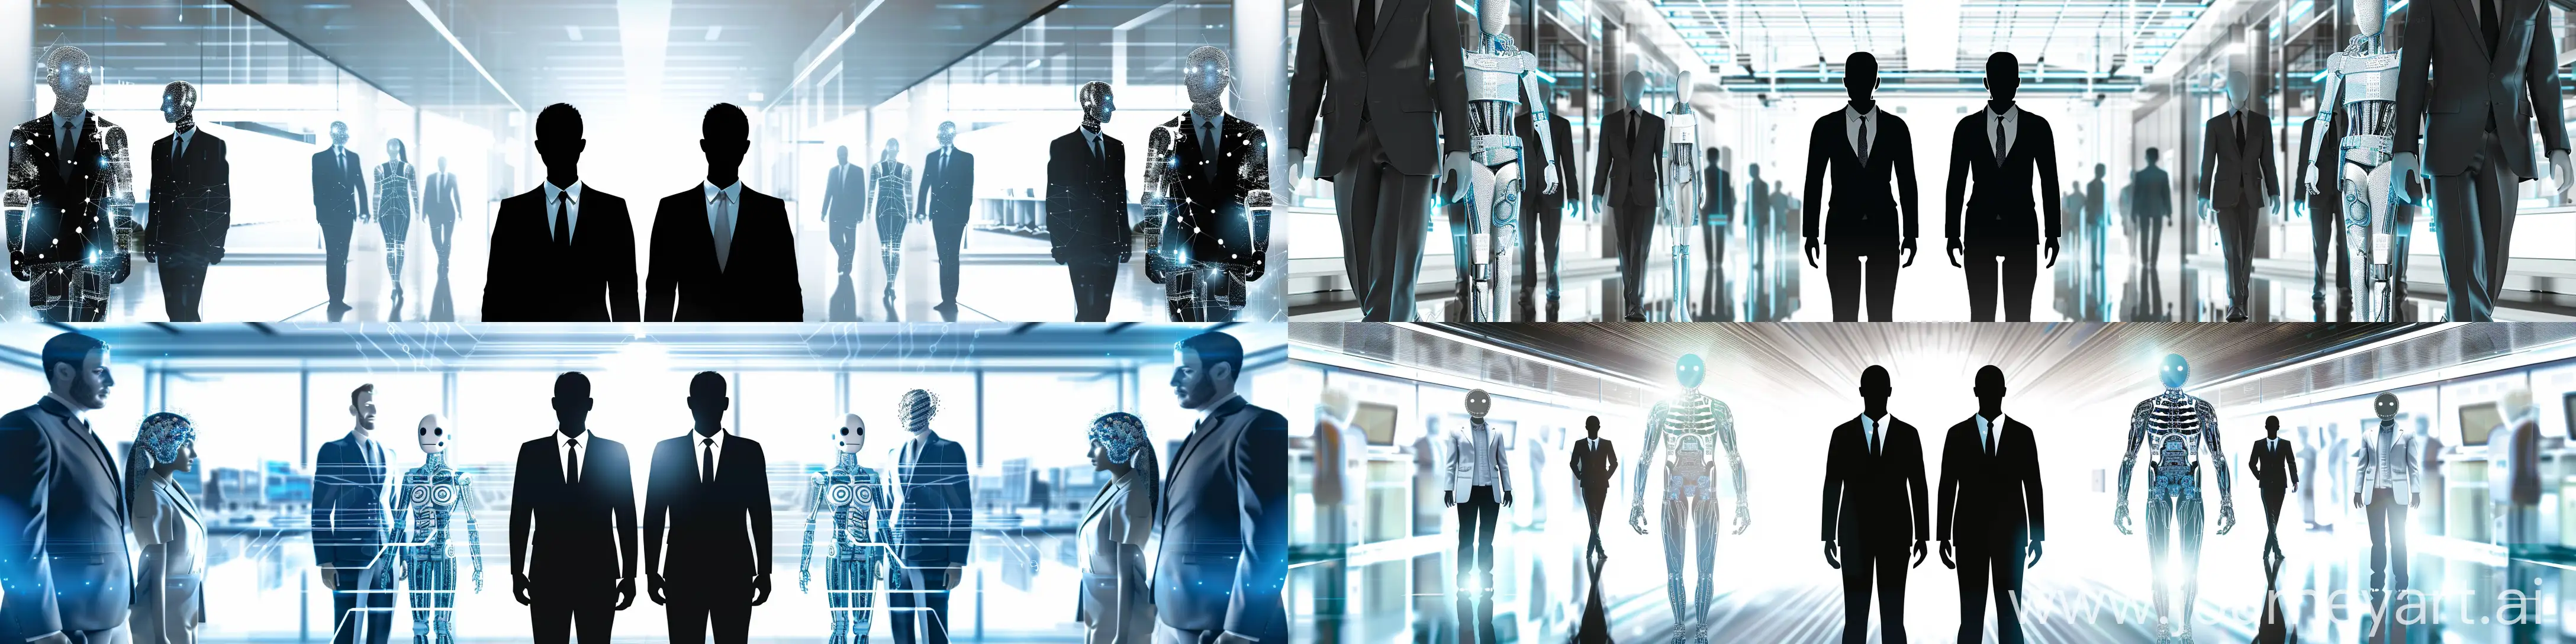 /imagine prompt: A social media banner for job seekers featuring AI agency and high-performance computing. Two central black silhouette figures representing CTO and CEO in suits, with 2-3 silver-blue-white AI agent engineers and managers on either side. The background is a sleek, modern business setting, minimalistic and professional, following the "less is more" philosophy. The image should feel visionary and connected. Created using: sleek vector graphics, modern minimalism, clean business aesthetics, futuristic elements, soft lighting, hd quality, natural look --ar 4:1 --v 6.0